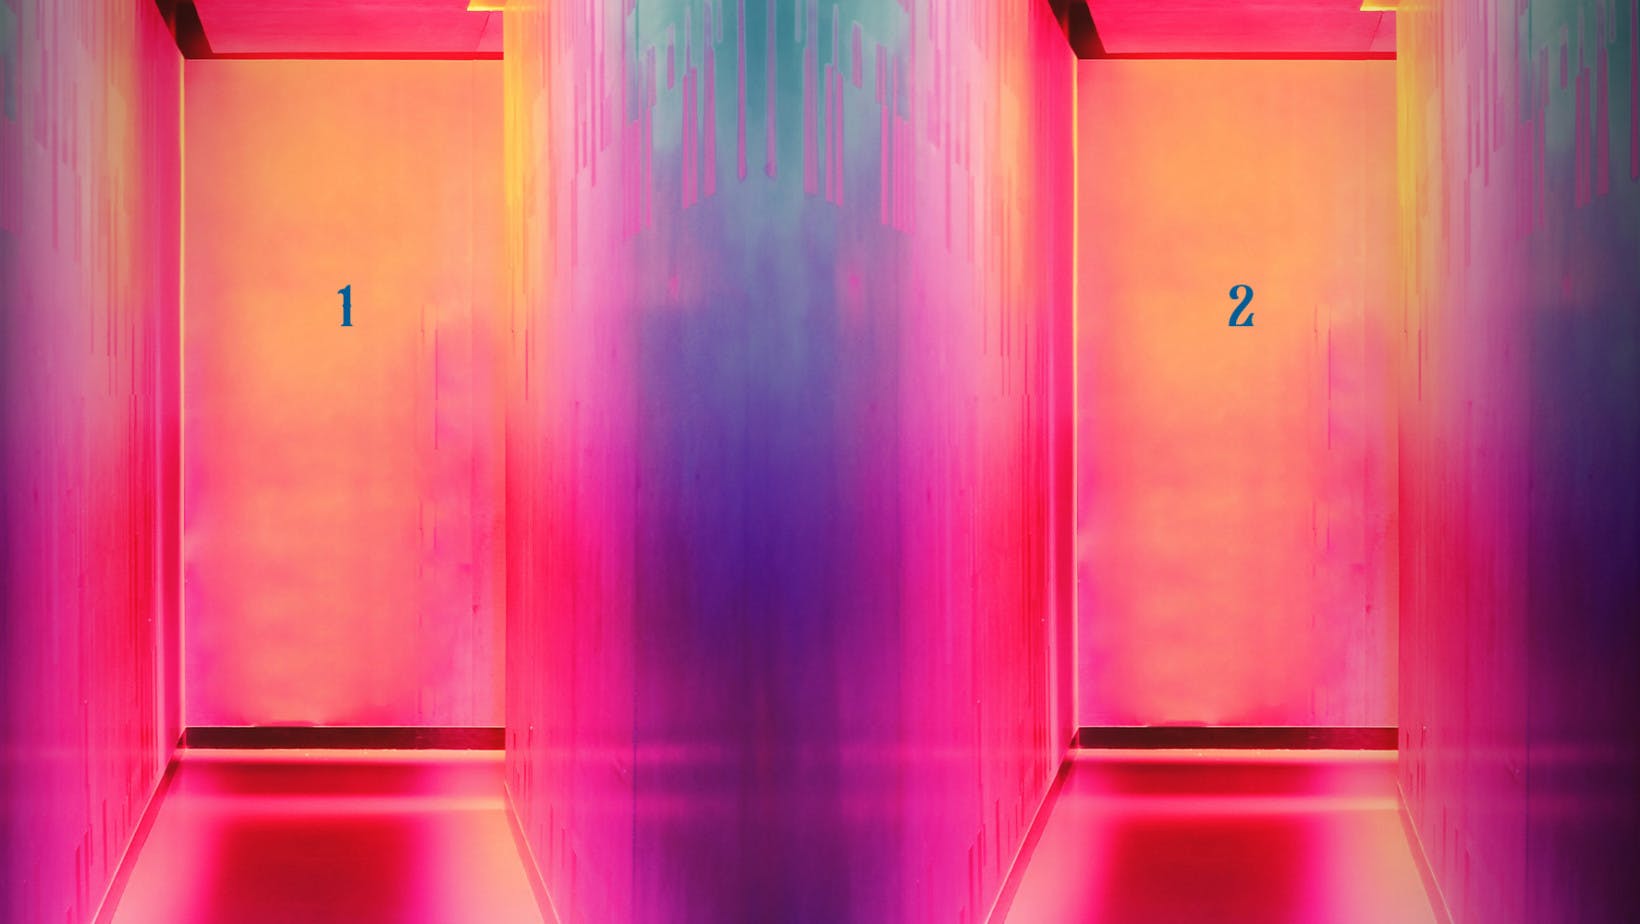 Neon colored image of a door representing degrees of freedom